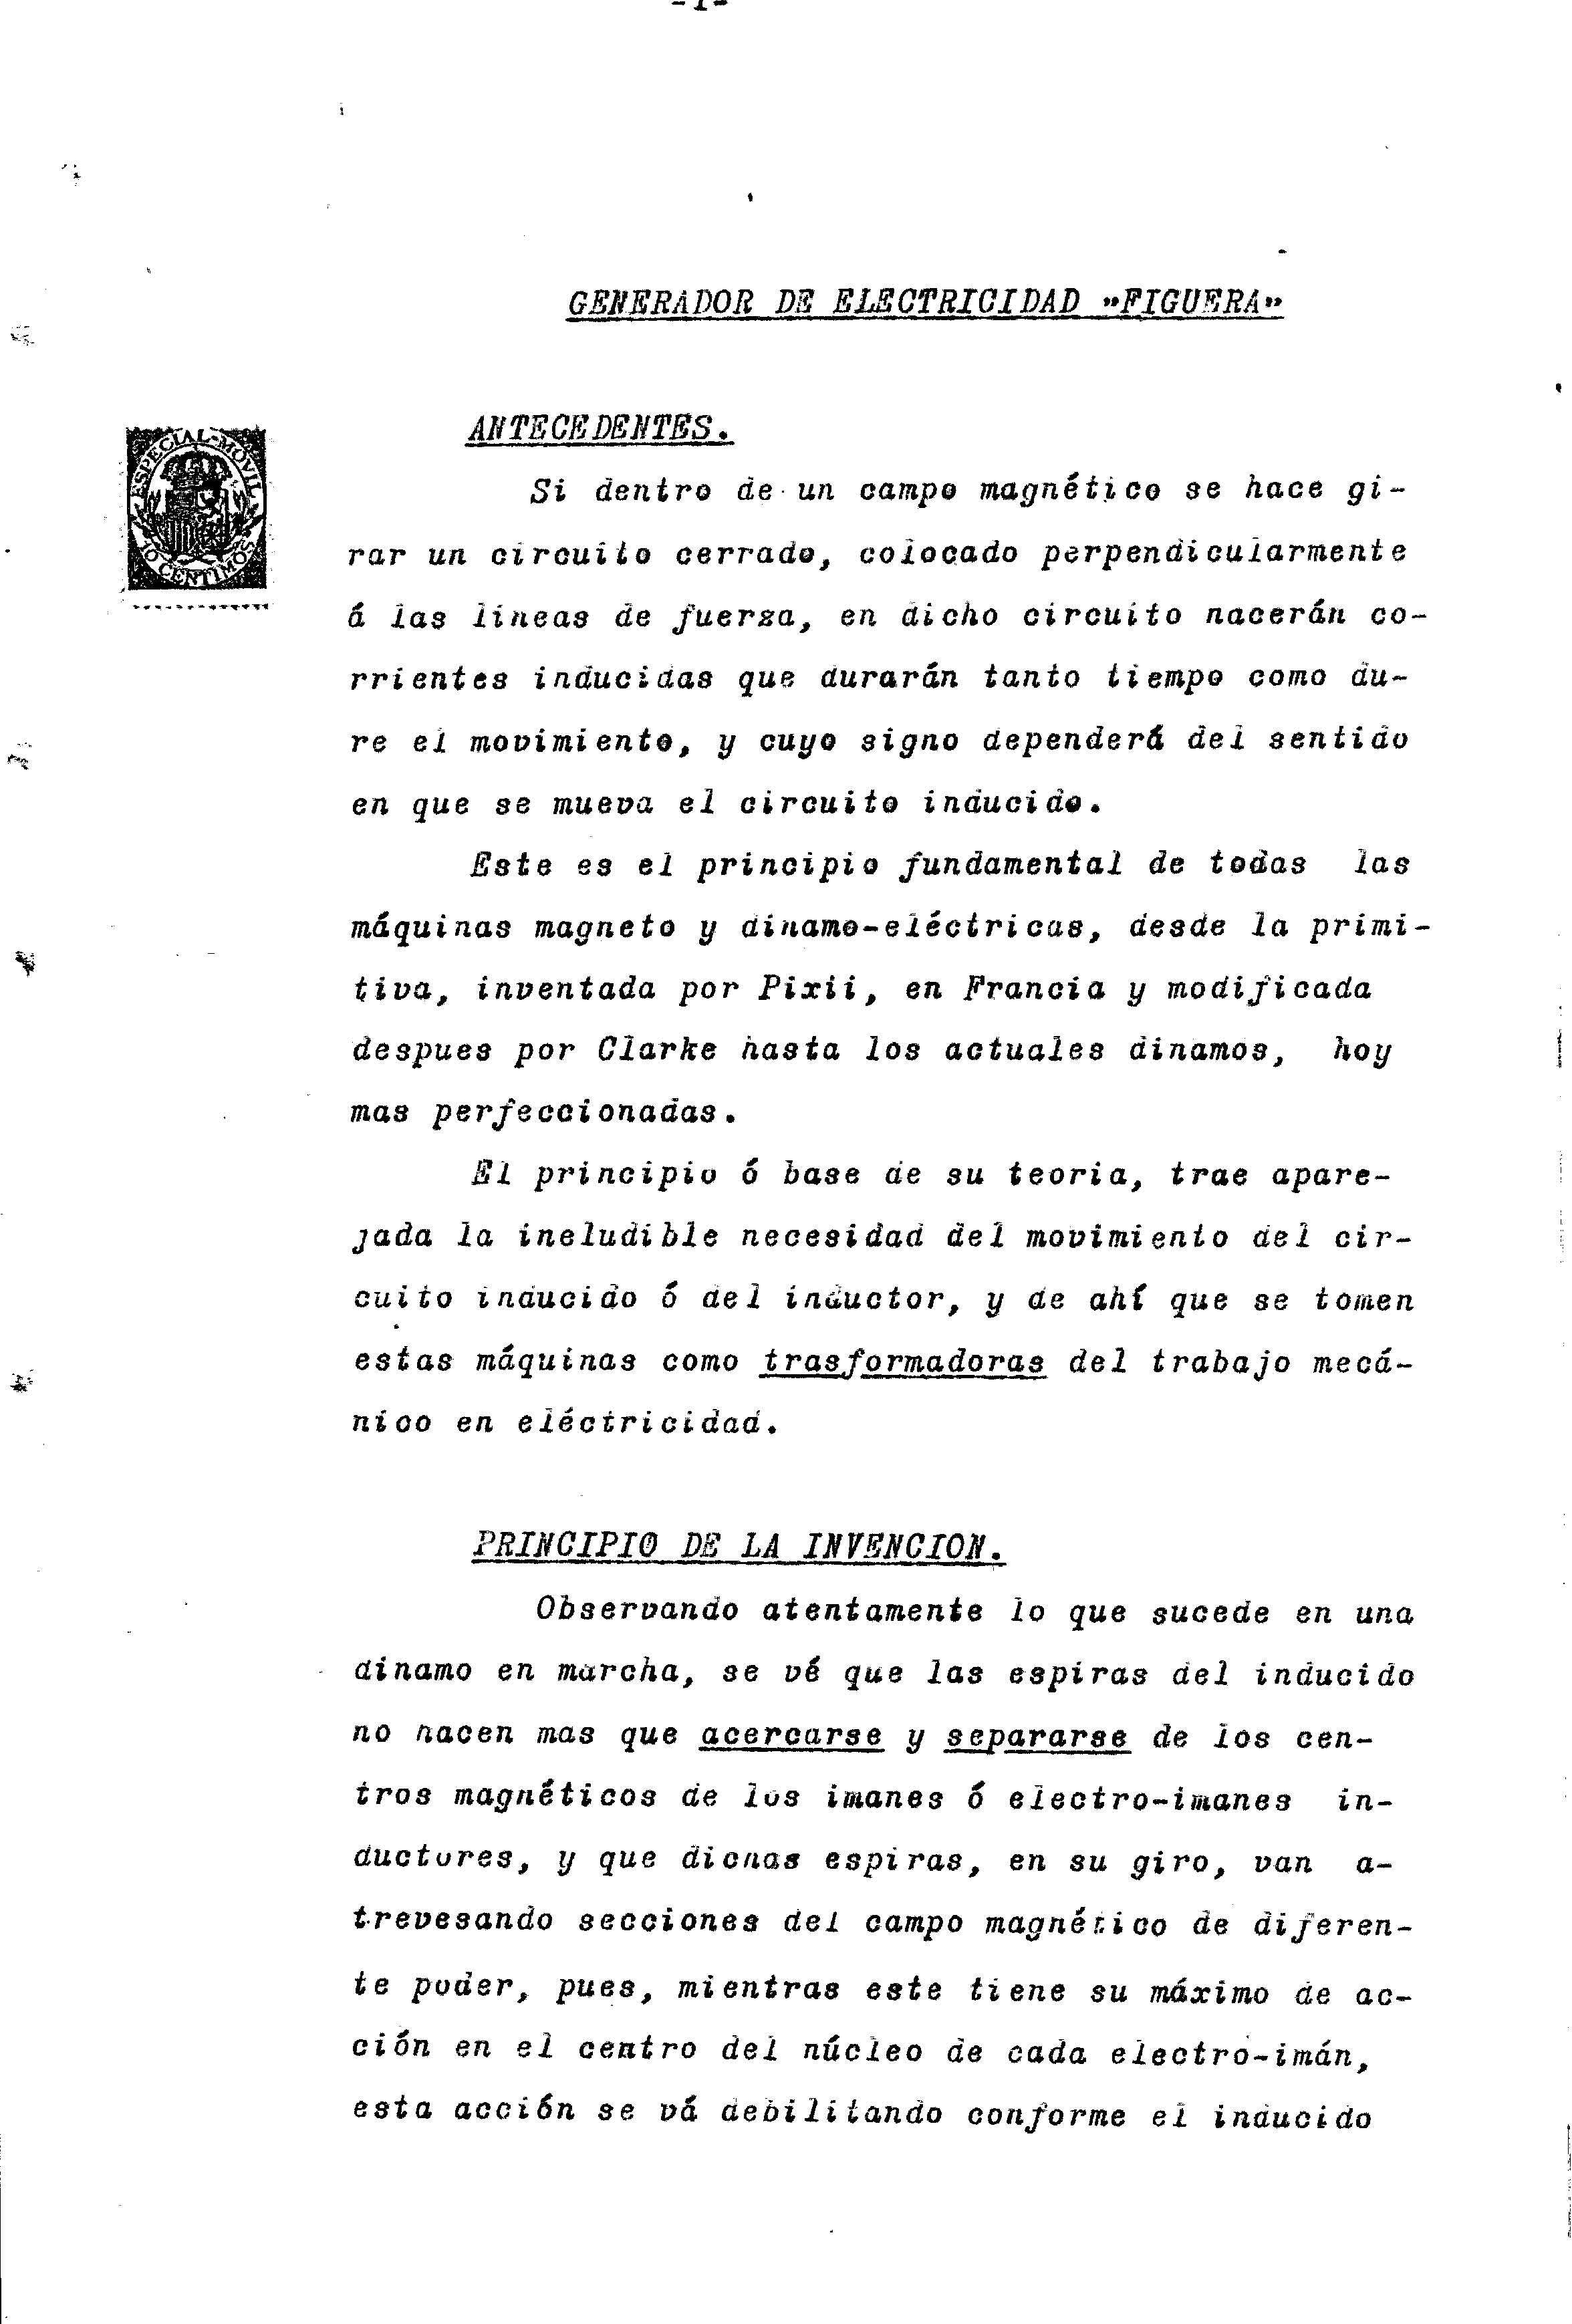 Clemente Figuera Patente 1908_Num_44267_scanned_OCR_Page_02.jpg